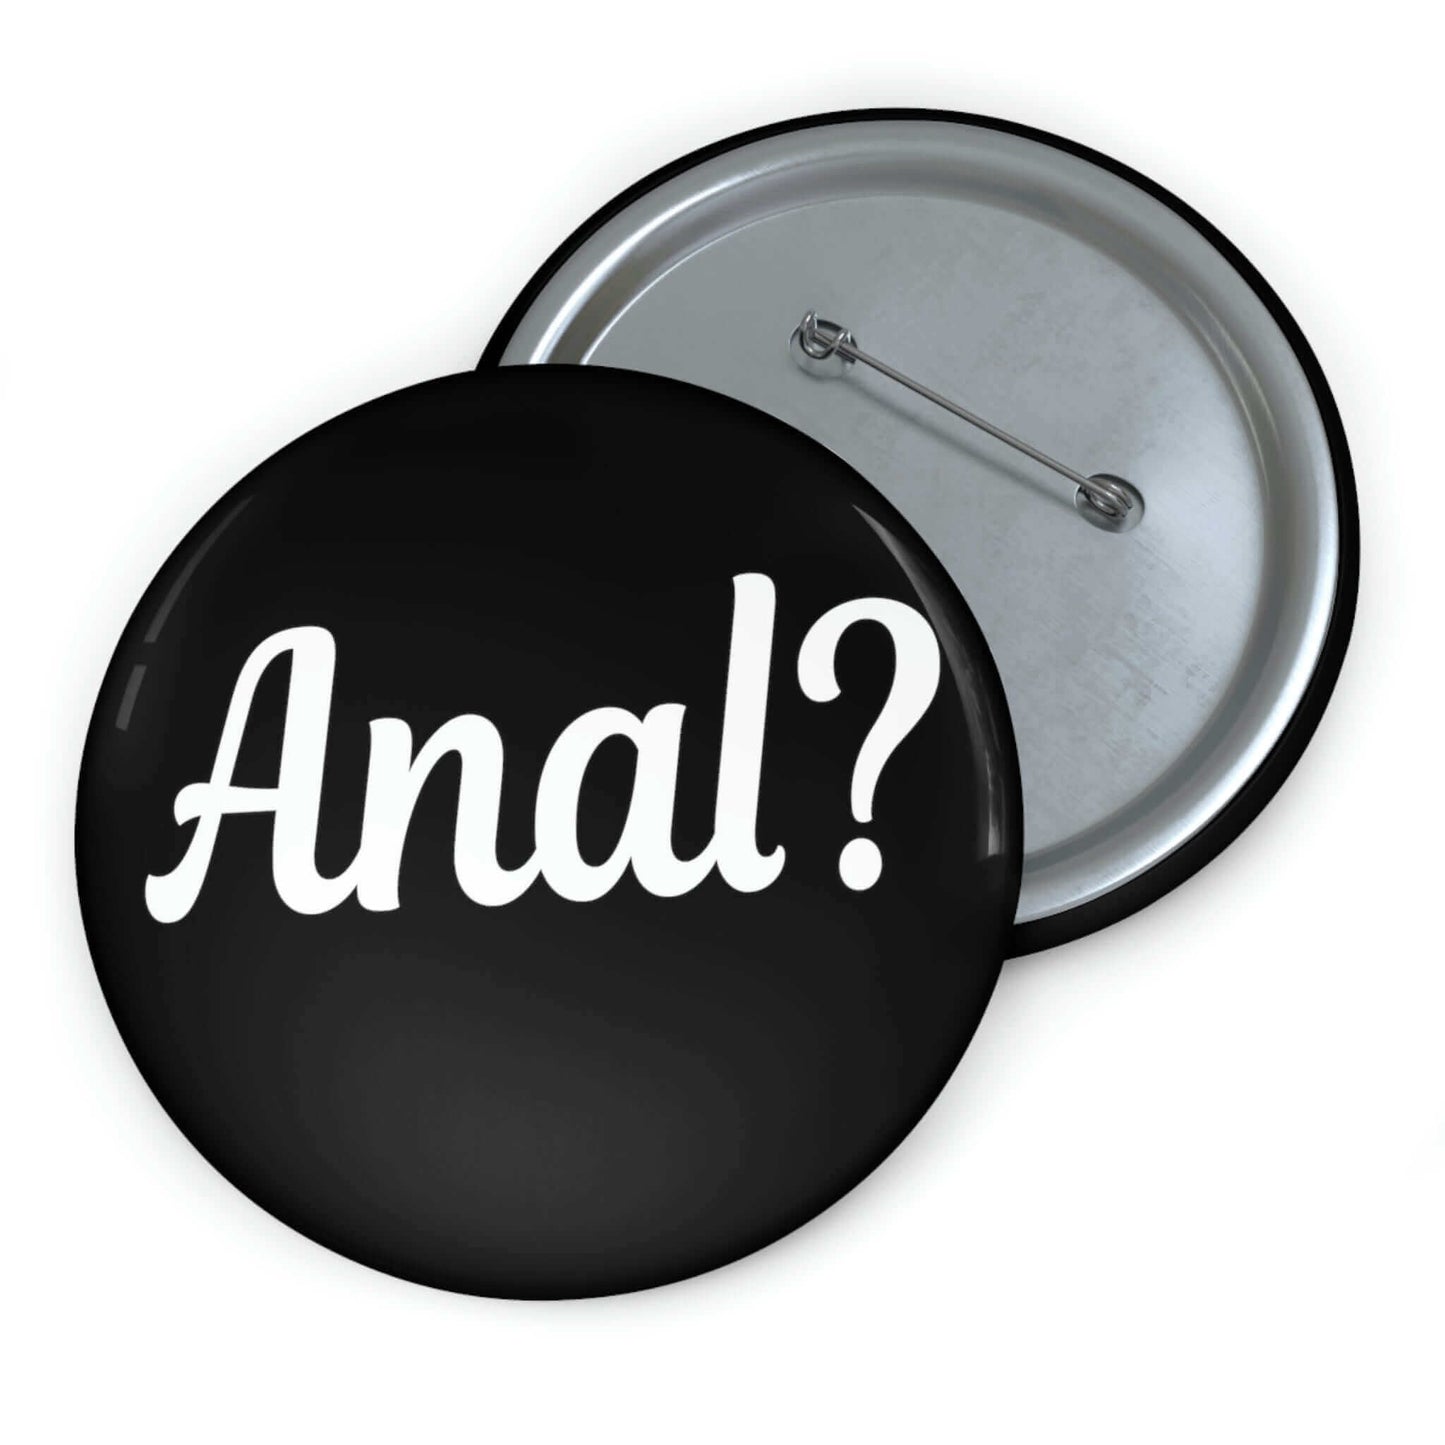 Pinback button that says Anal with a question mark